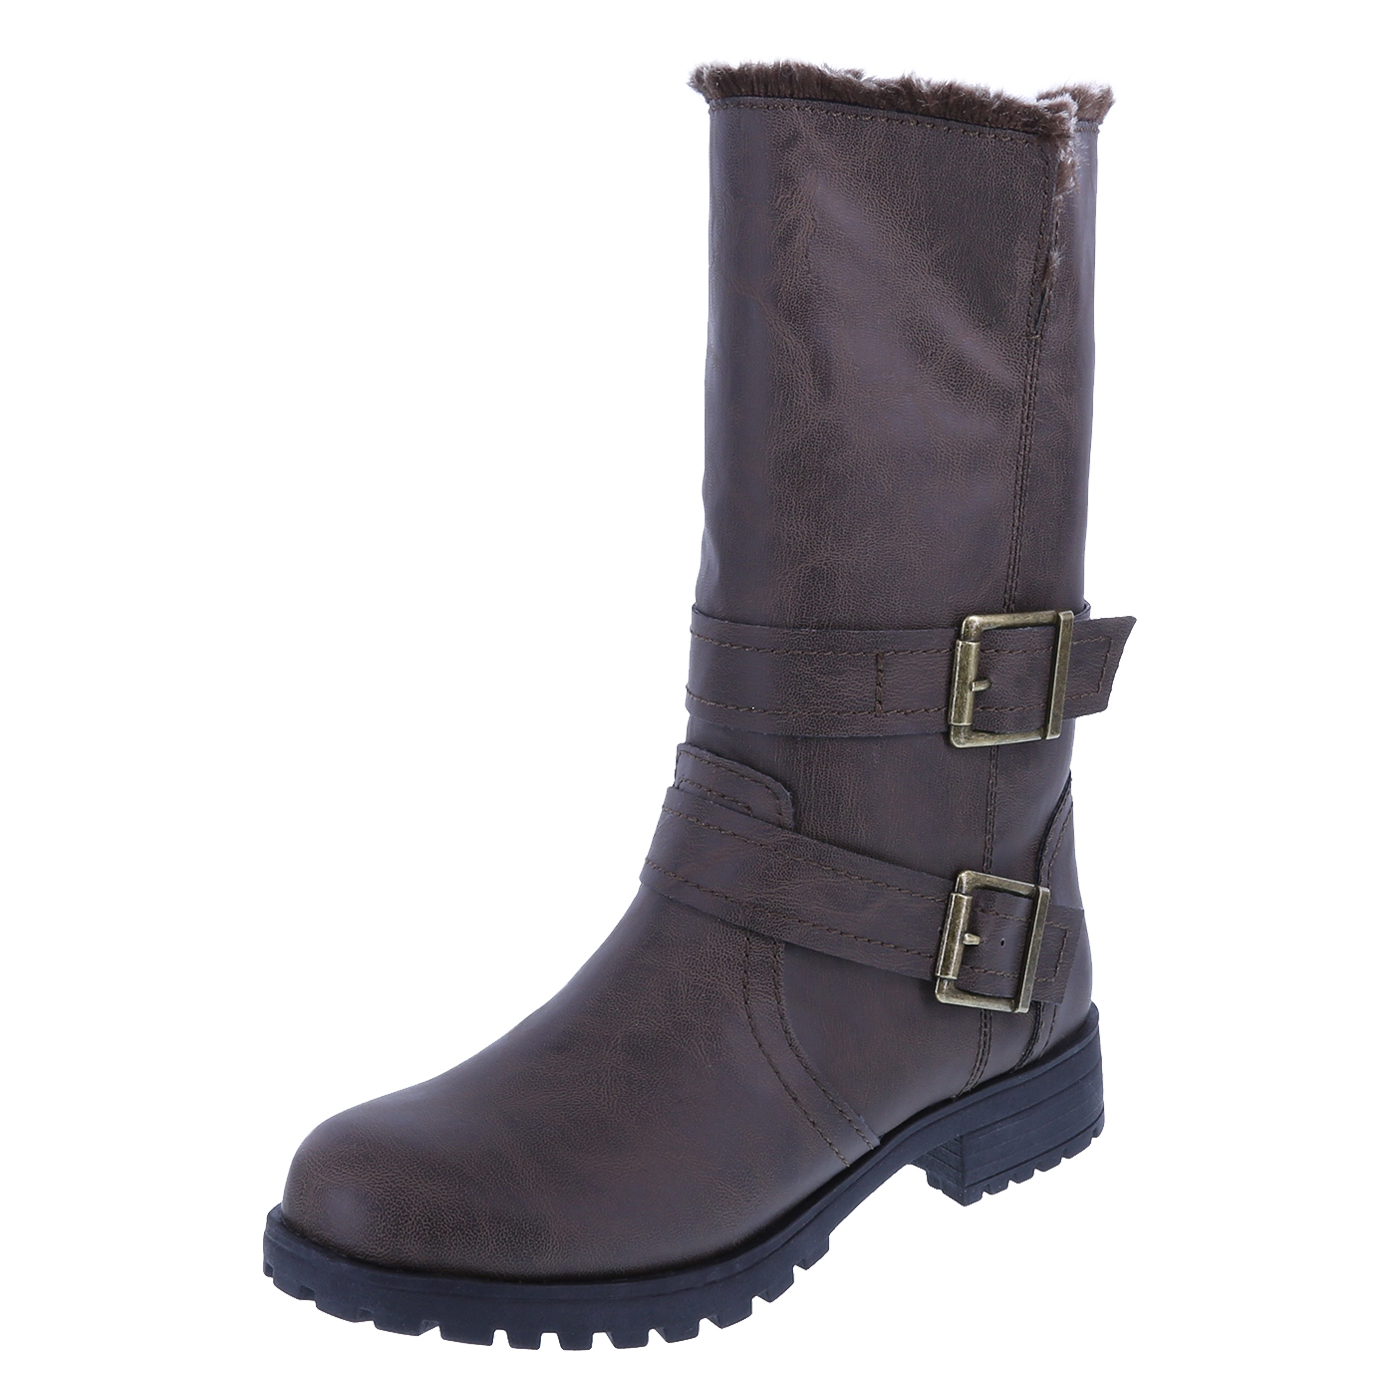 Rugged Outback Slade Women's Boot | Payless